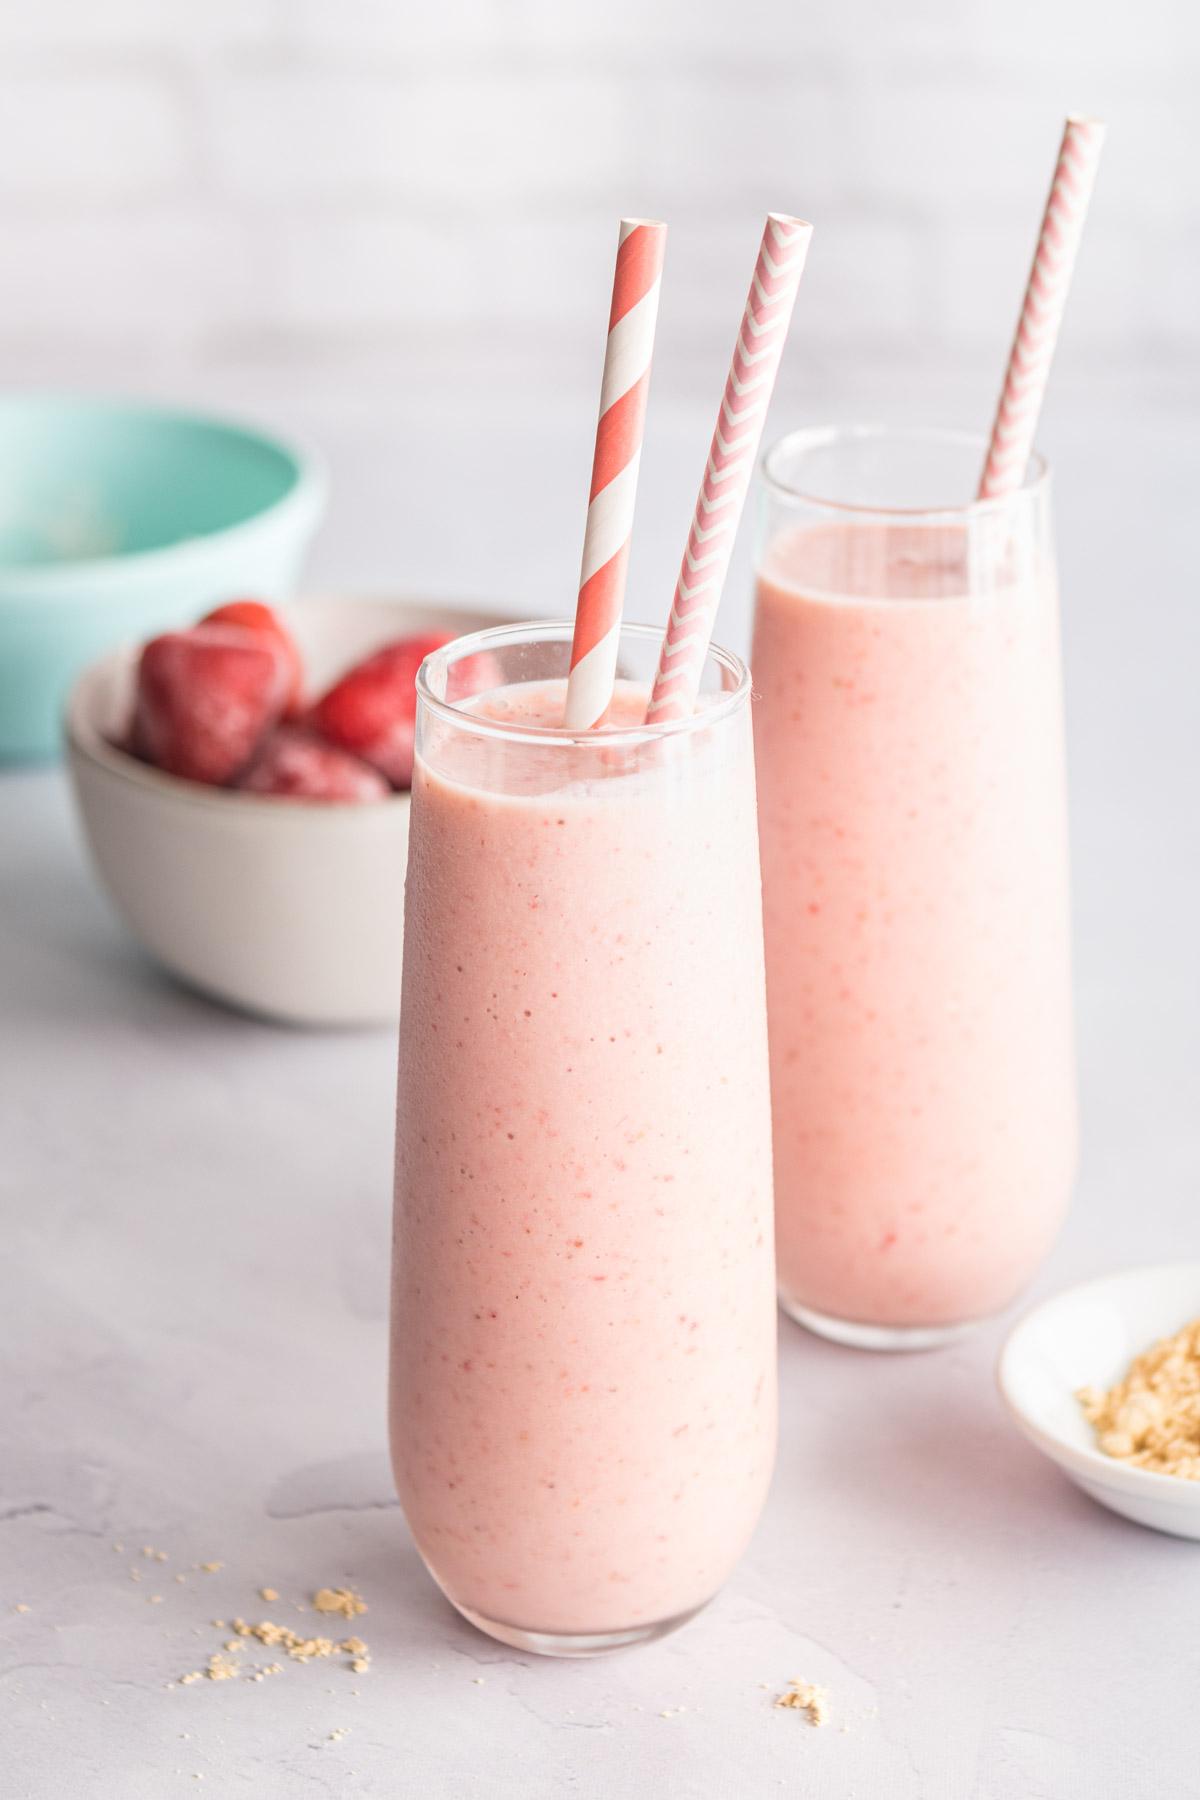 two glasses of strawberry banana smoothie with two straws in each